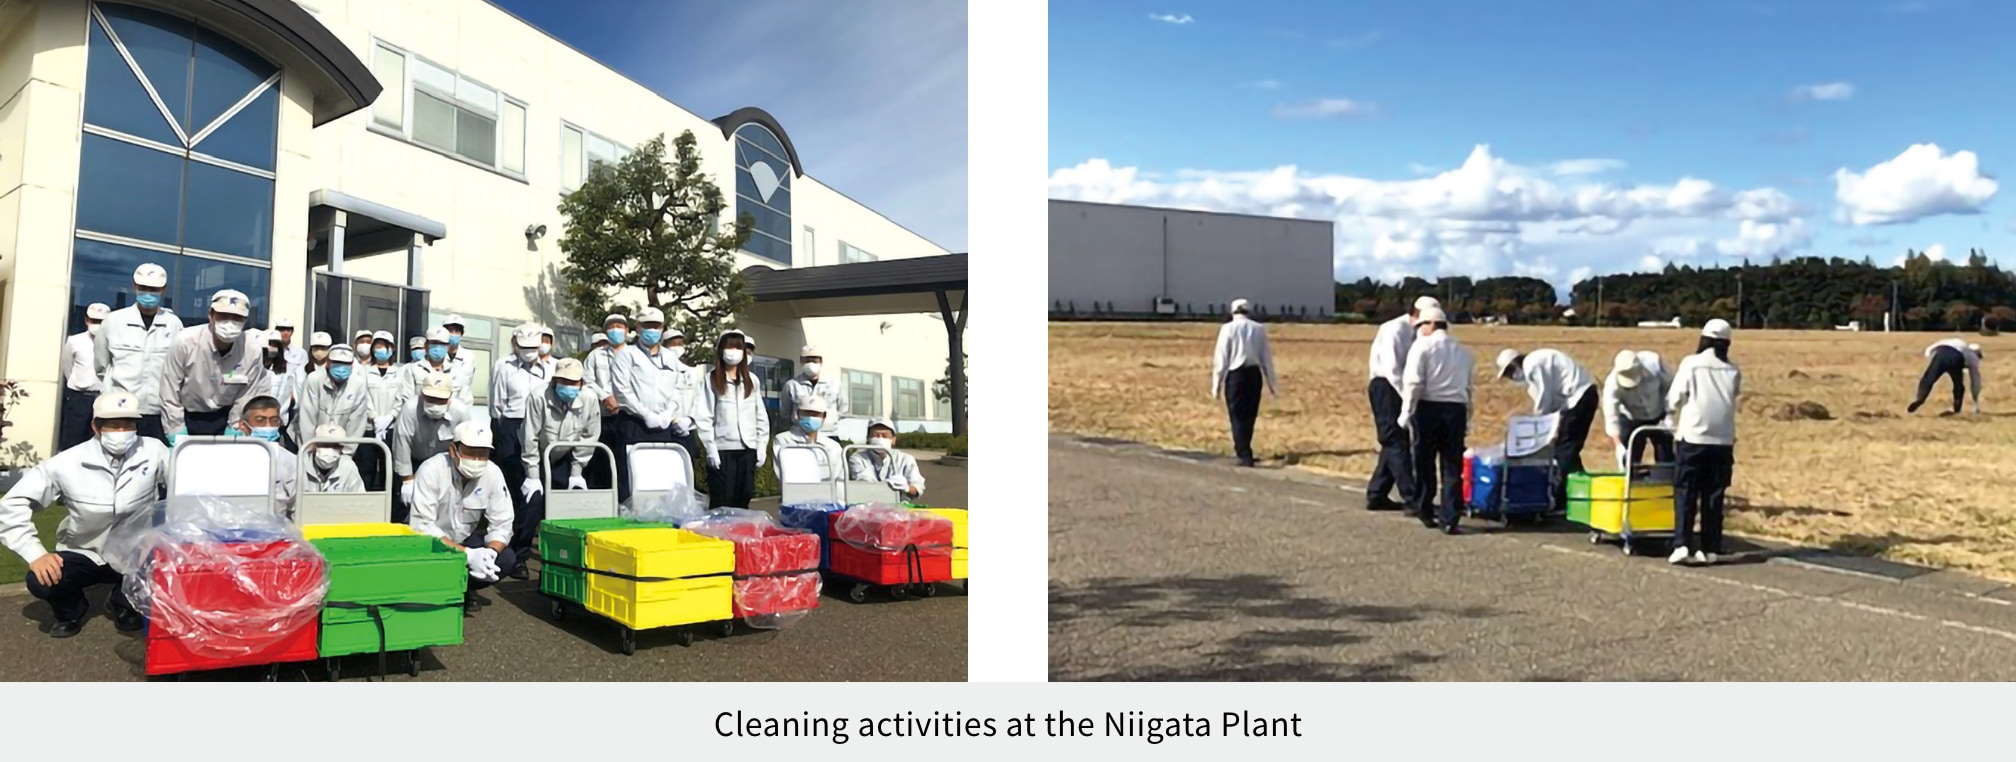 Cleaning activities at the Niigata Plant